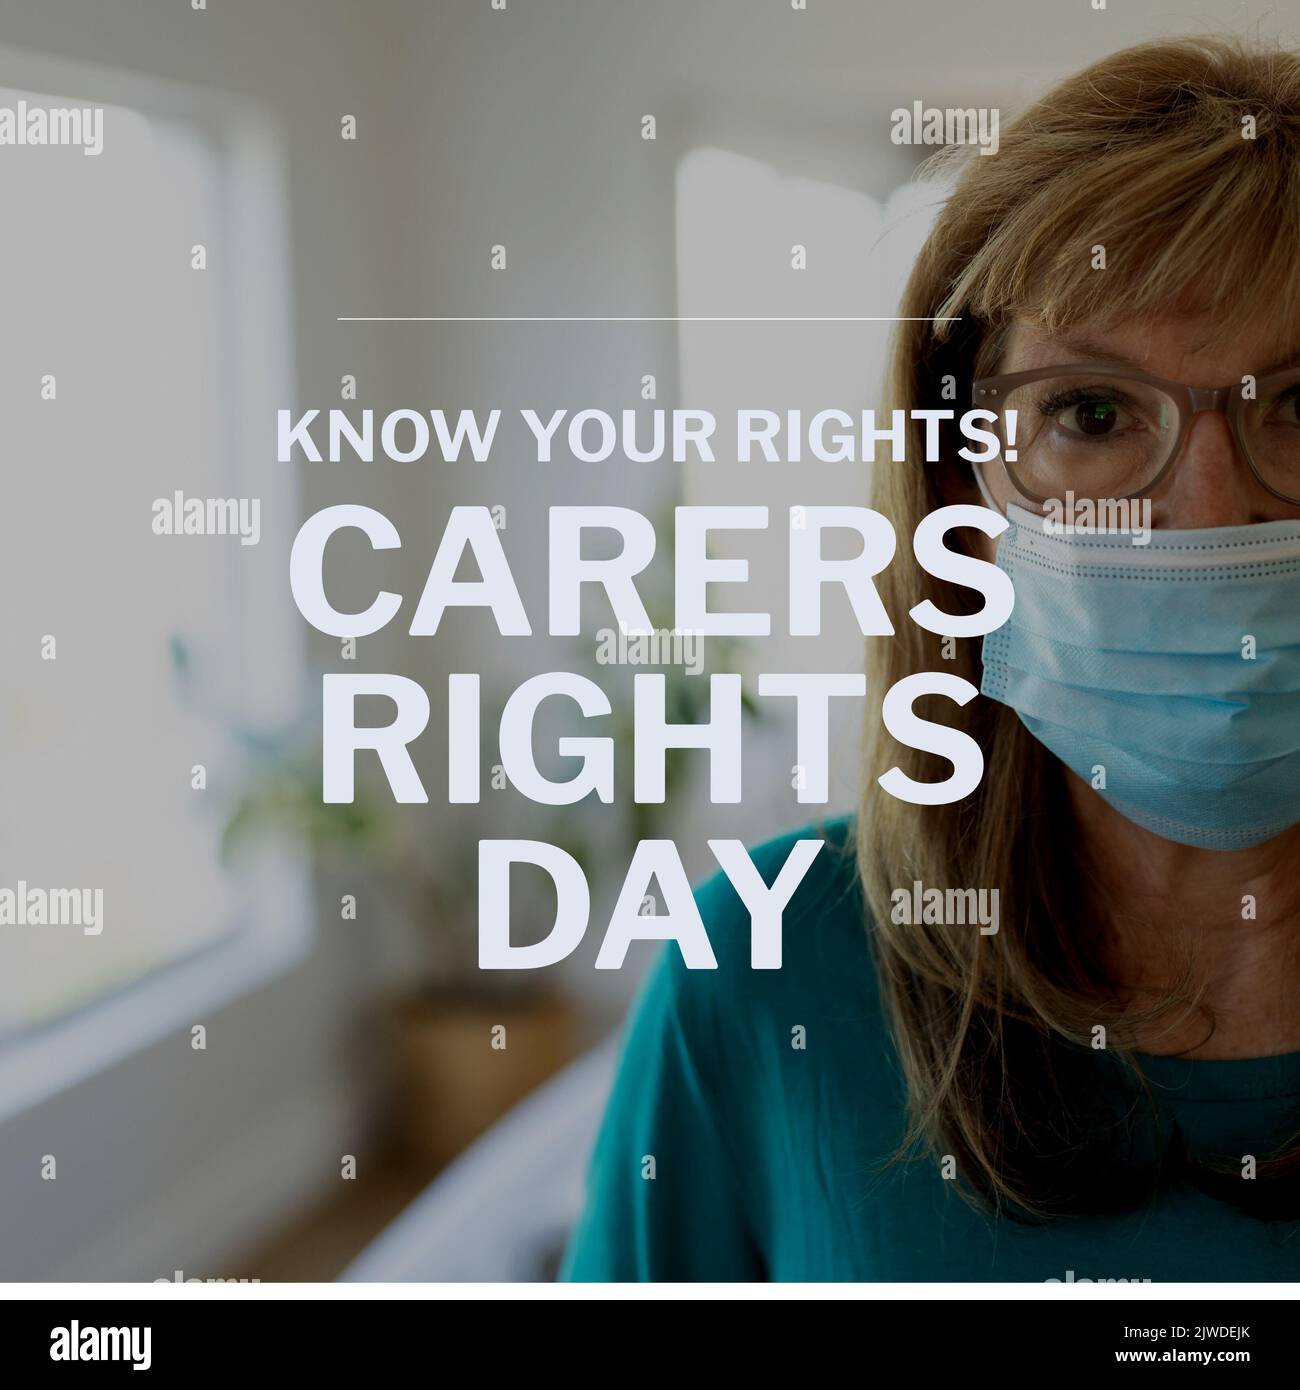 Composition of carers rights day text with caucasian woman wearing face mask Stock Photo